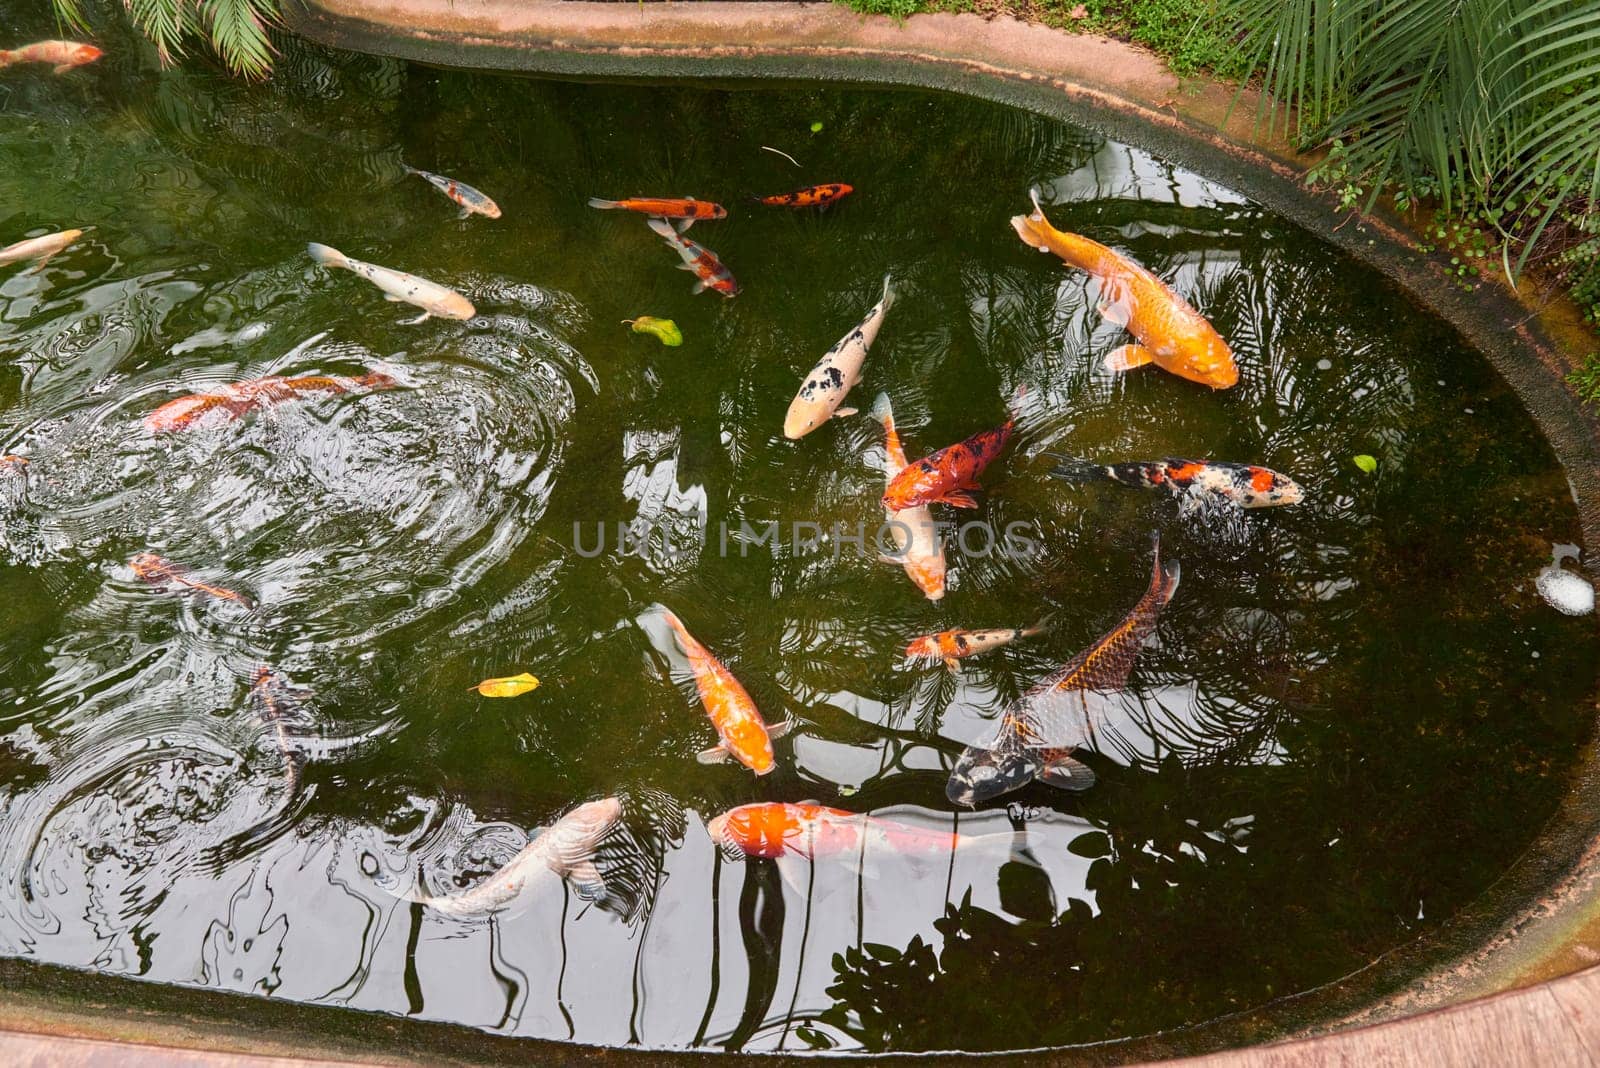 Majestic Japanese Koi Fish Swimming in Pond at Greenhouse. Japanese Carp Gracefully Gliding in Greenhouse Pond. Tranquil Japanese Koi Fish Pond in Greenhouse Oasis. Exotic Japanese Koi Fish in Ornamental Greenhouse Pond. Vibrant Japanese Koi Fish Swimming in Greenhouse Pond. by Andrii_Ko